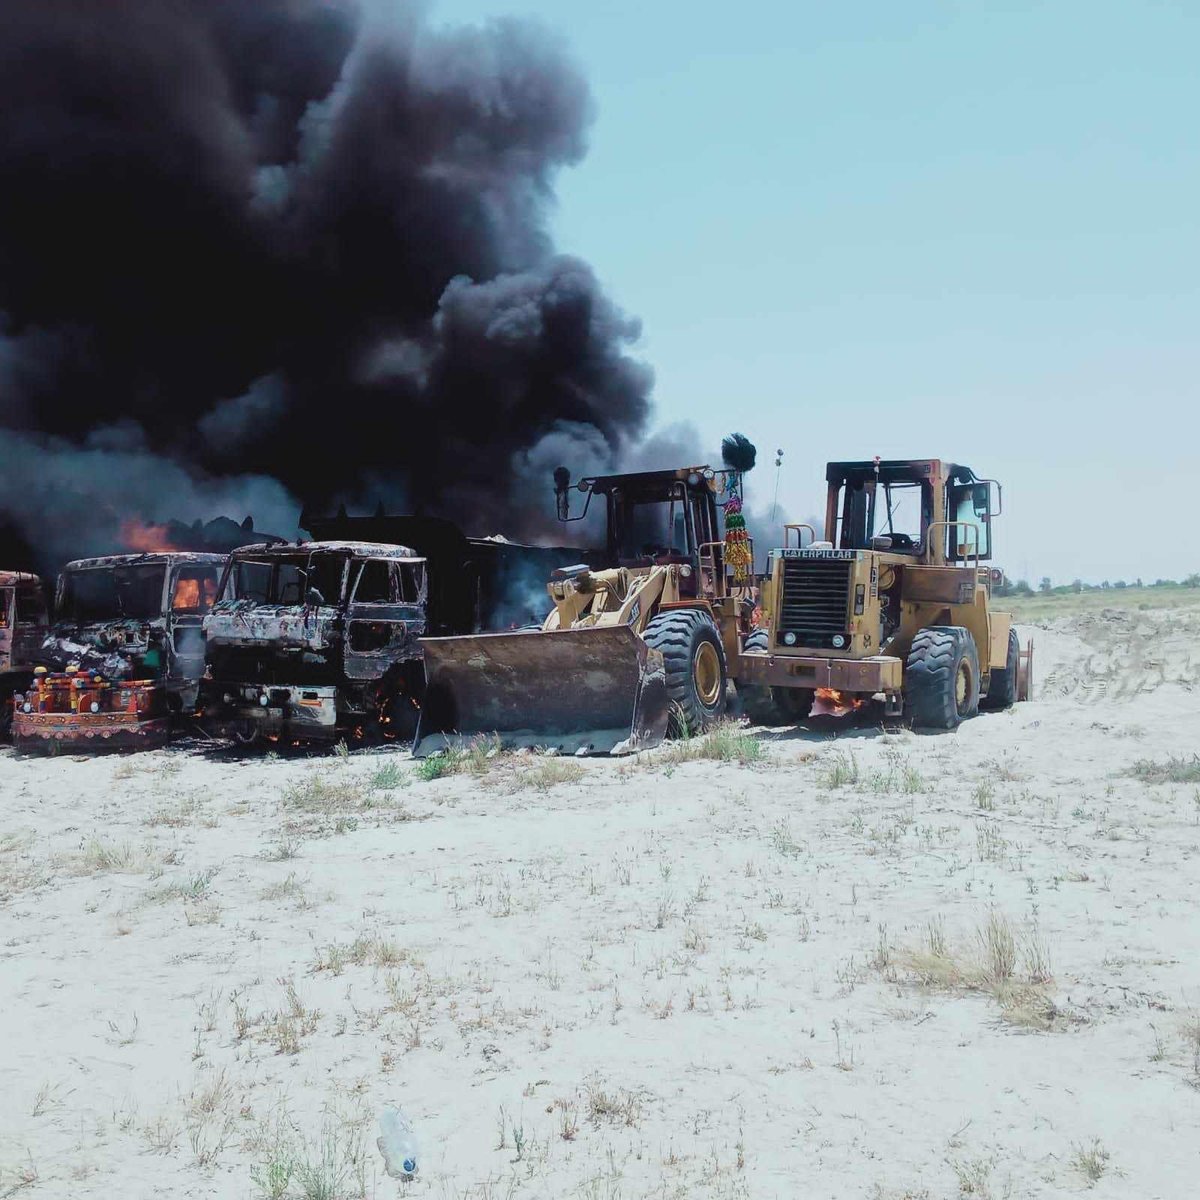 Armed men attacked the construction company in Nalent area of #Gwadar and set fire to all the machinery. 

#Balochistan